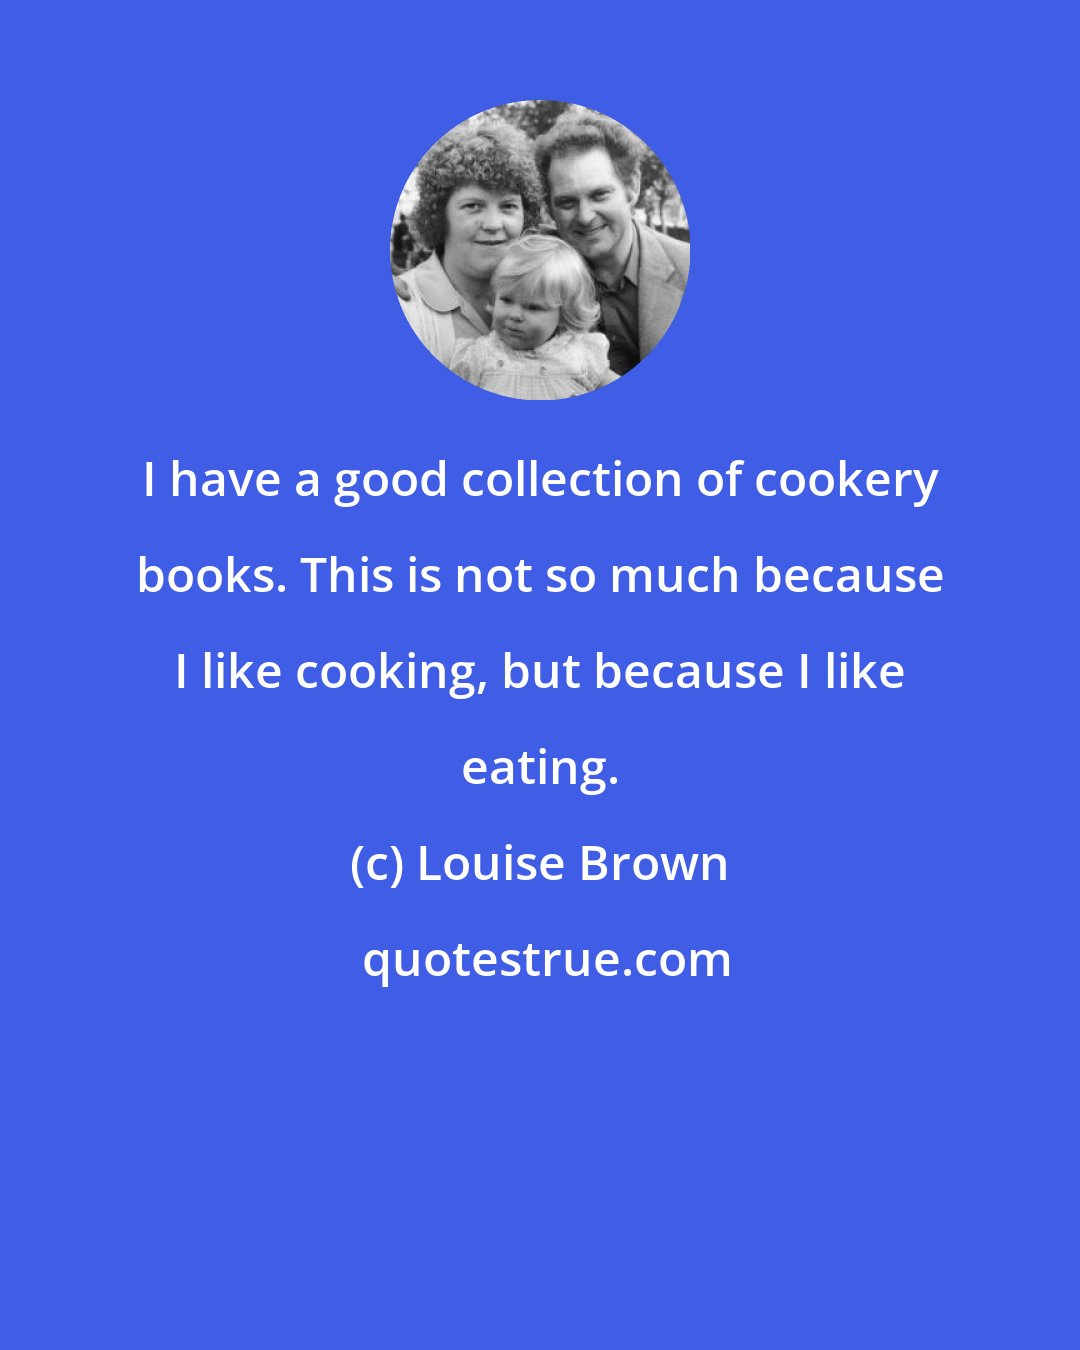 Louise Brown: I have a good collection of cookery books. This is not so much because I like cooking, but because I like eating.